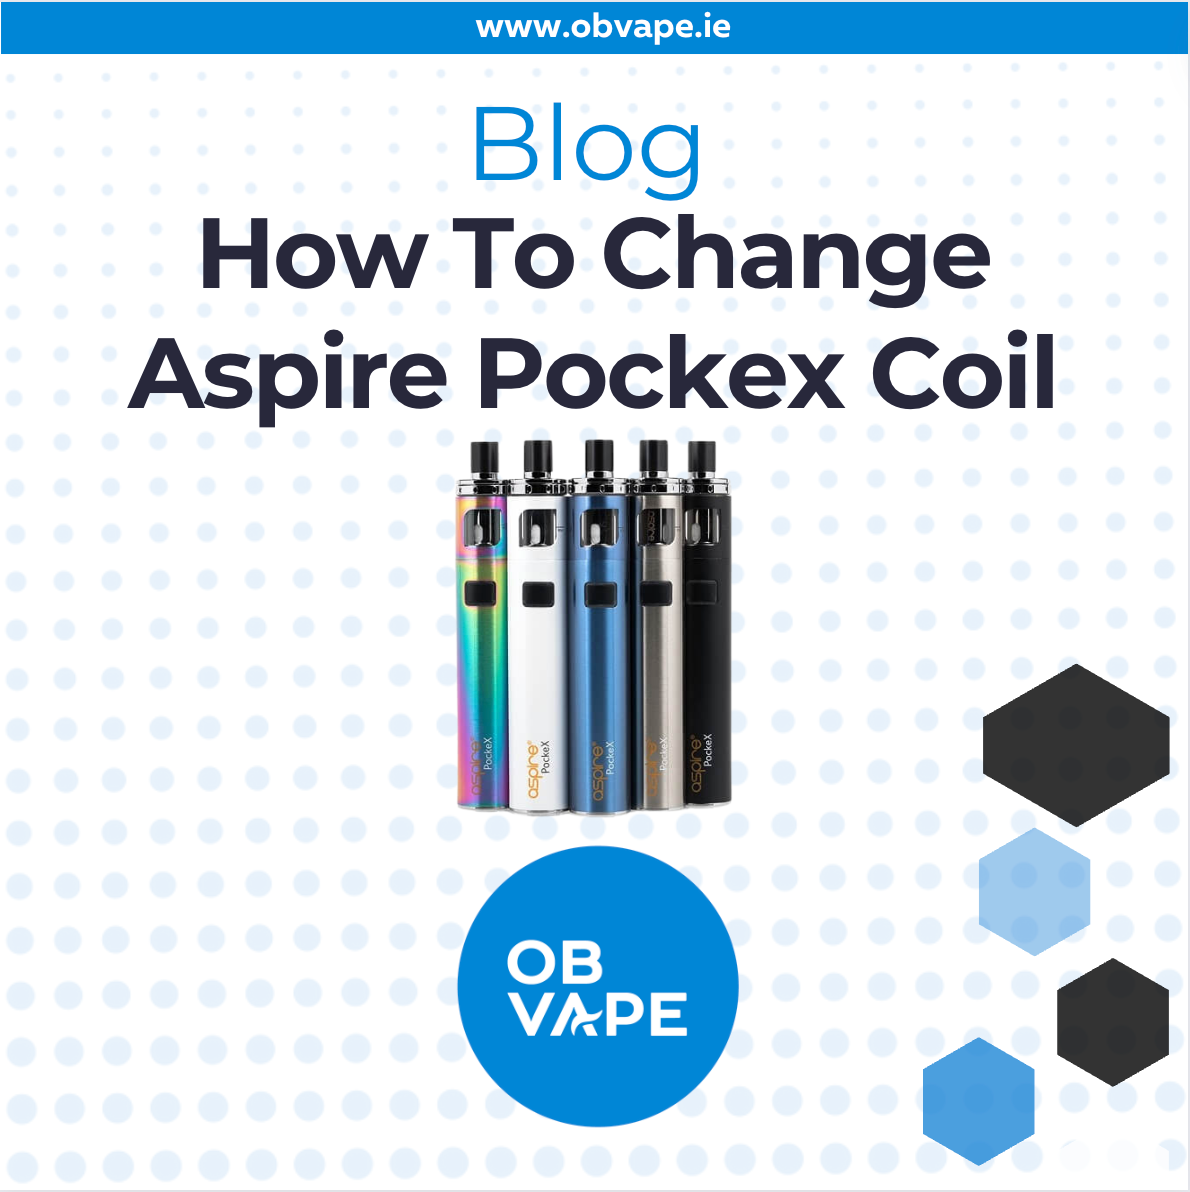 How To Change Aspire Pockex Coil